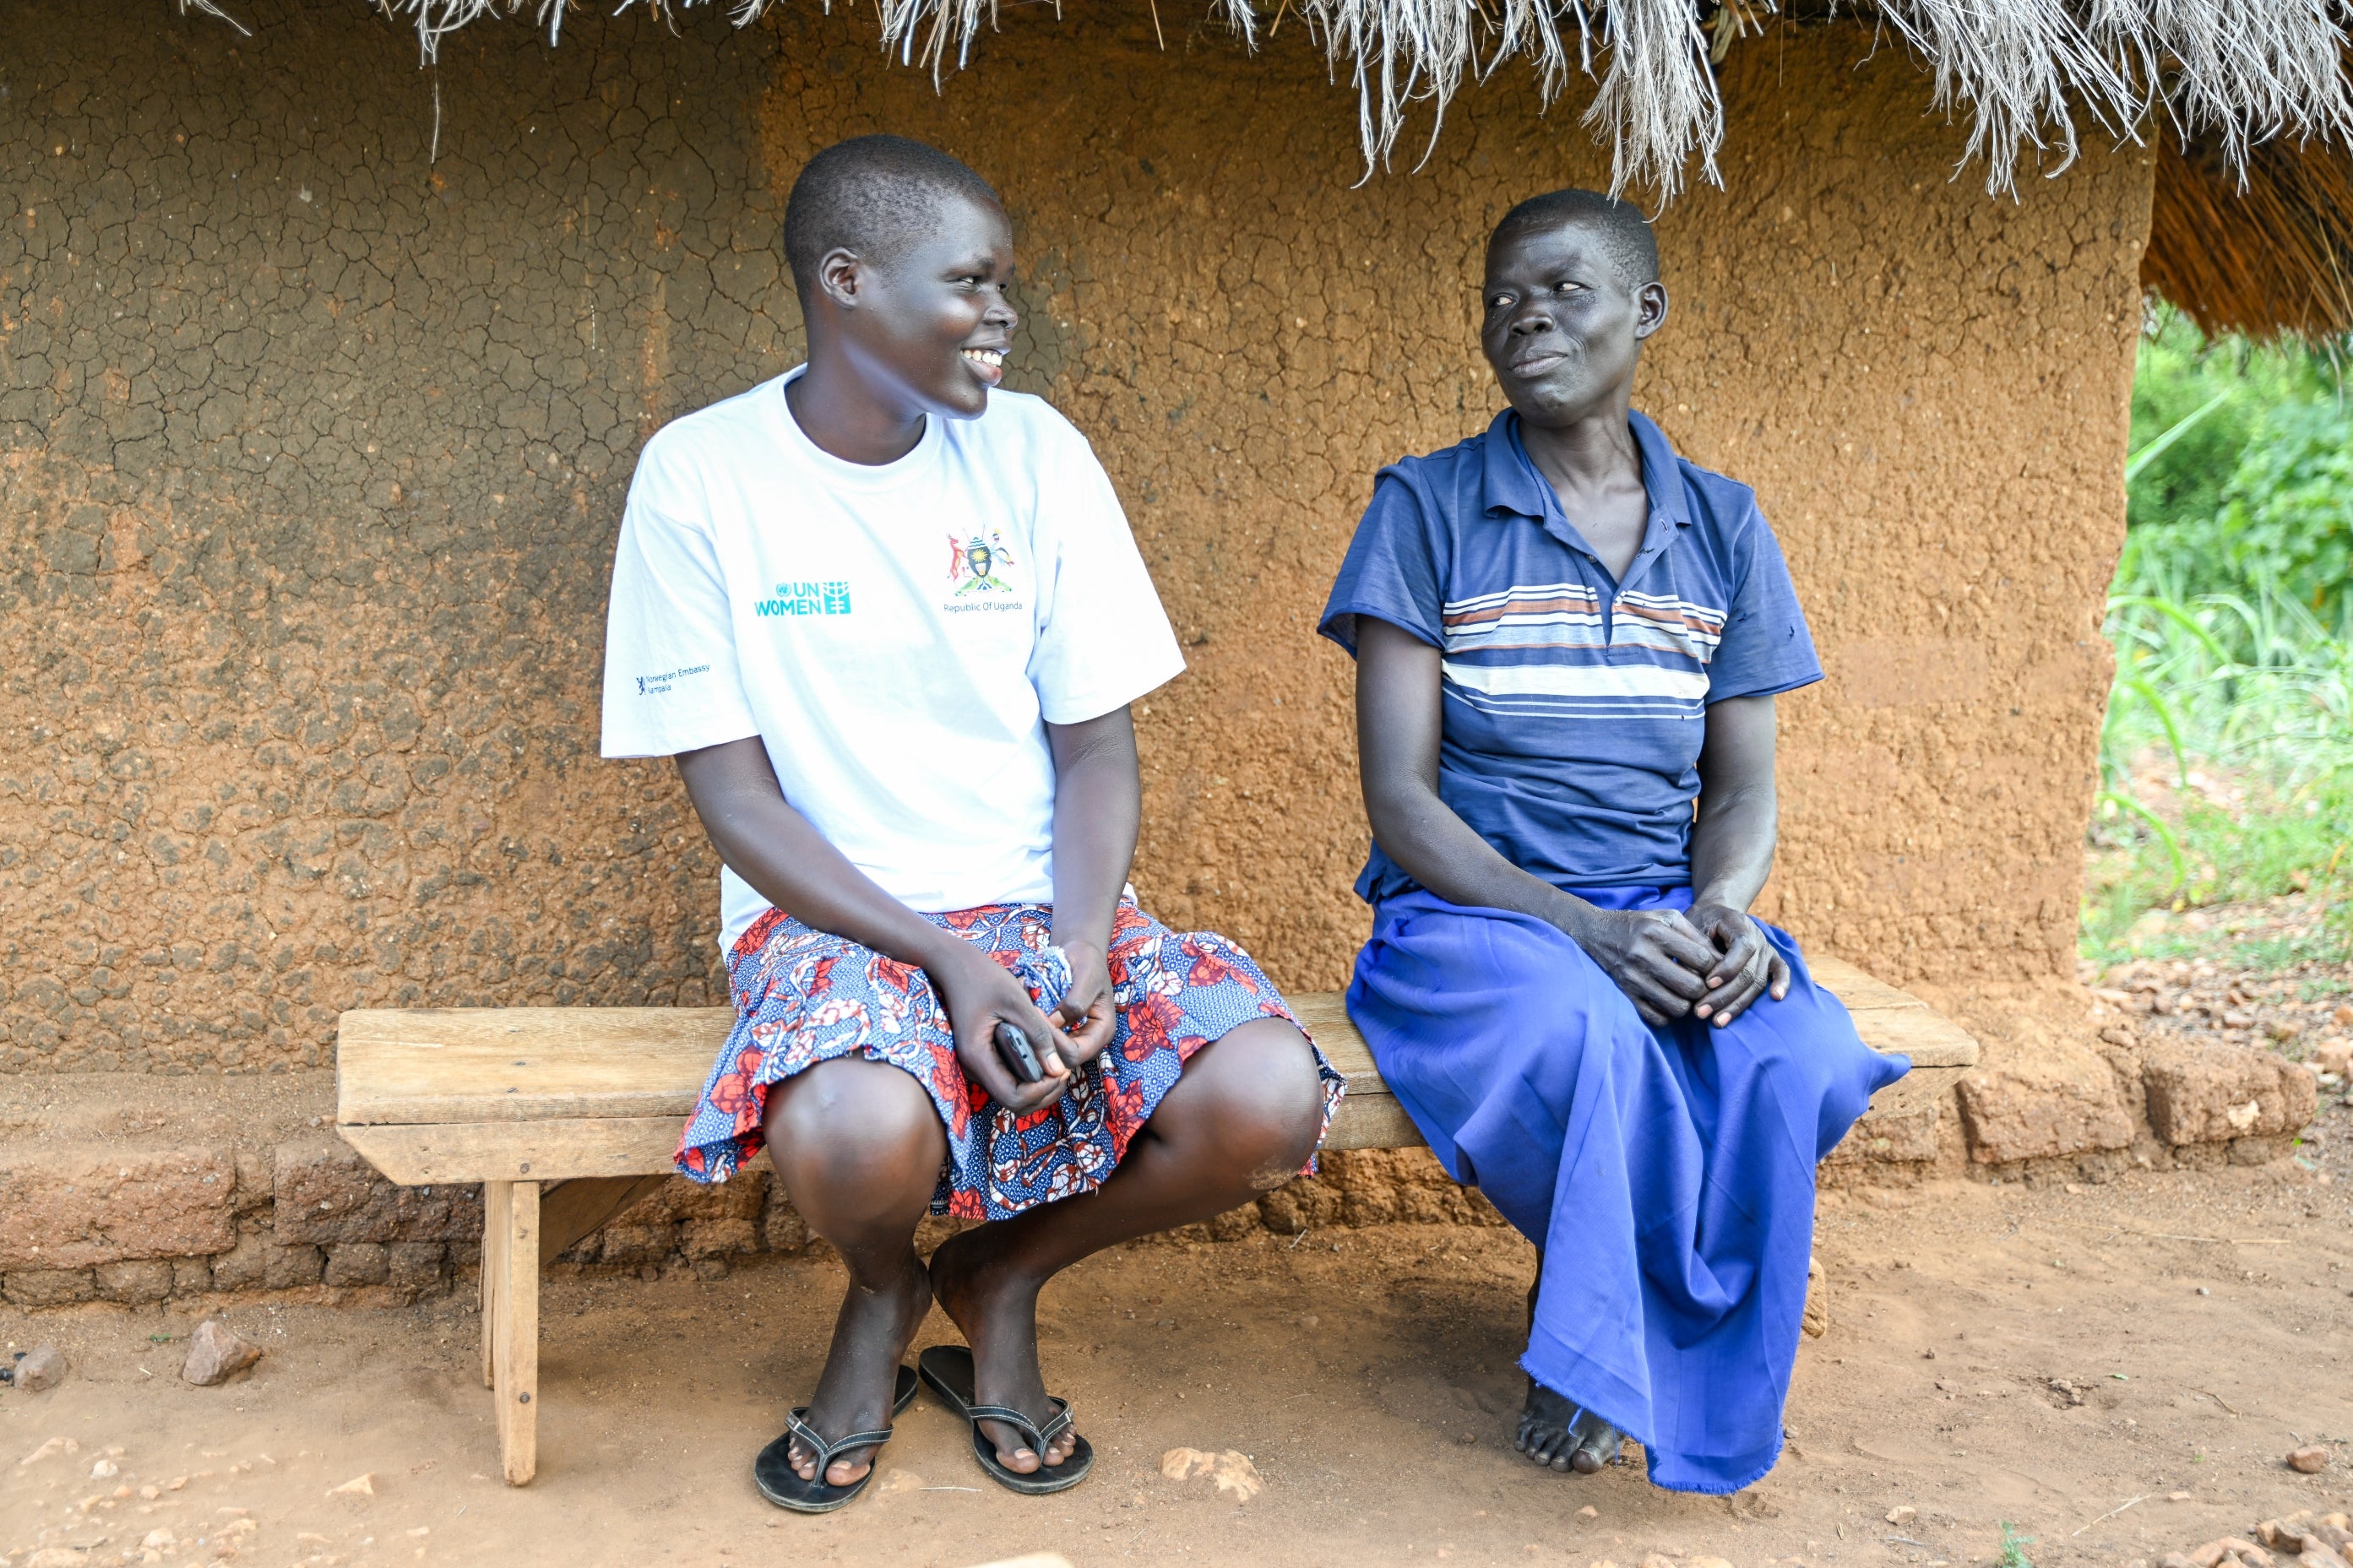 Annet Luka, a South Sudanese refugee, shares a light moment with her mother outside their home in Terego, northern Uganda. Annet has already helped her family by making the wooden bench that she is sitting on. (Photo: UN Women/James Ochweri)